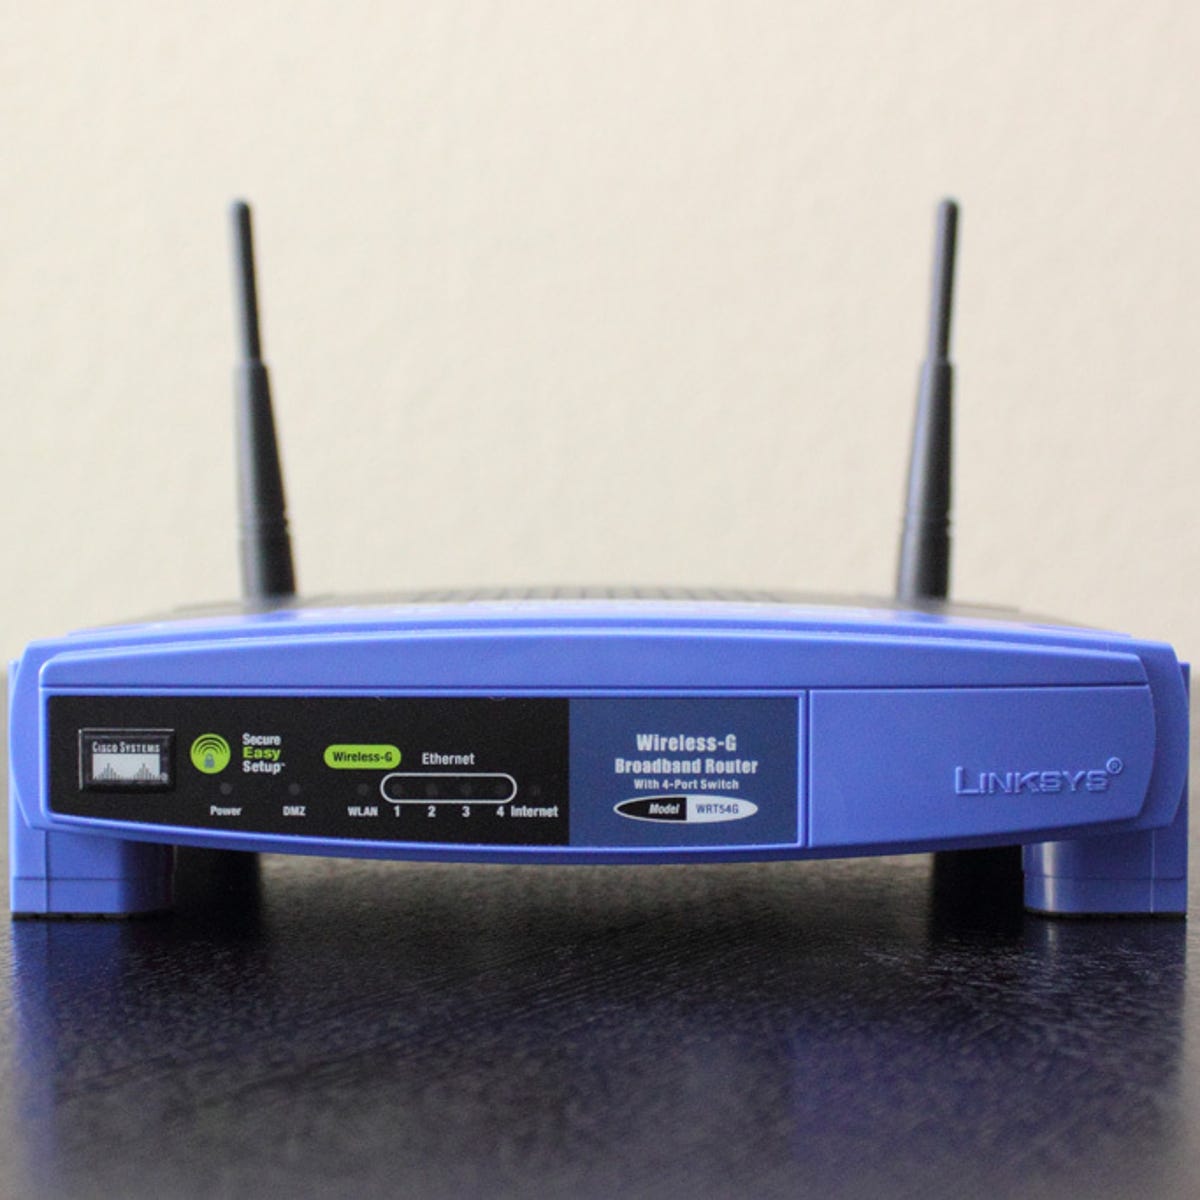 Reuse an old router to bridge devices to your wireless - CNET